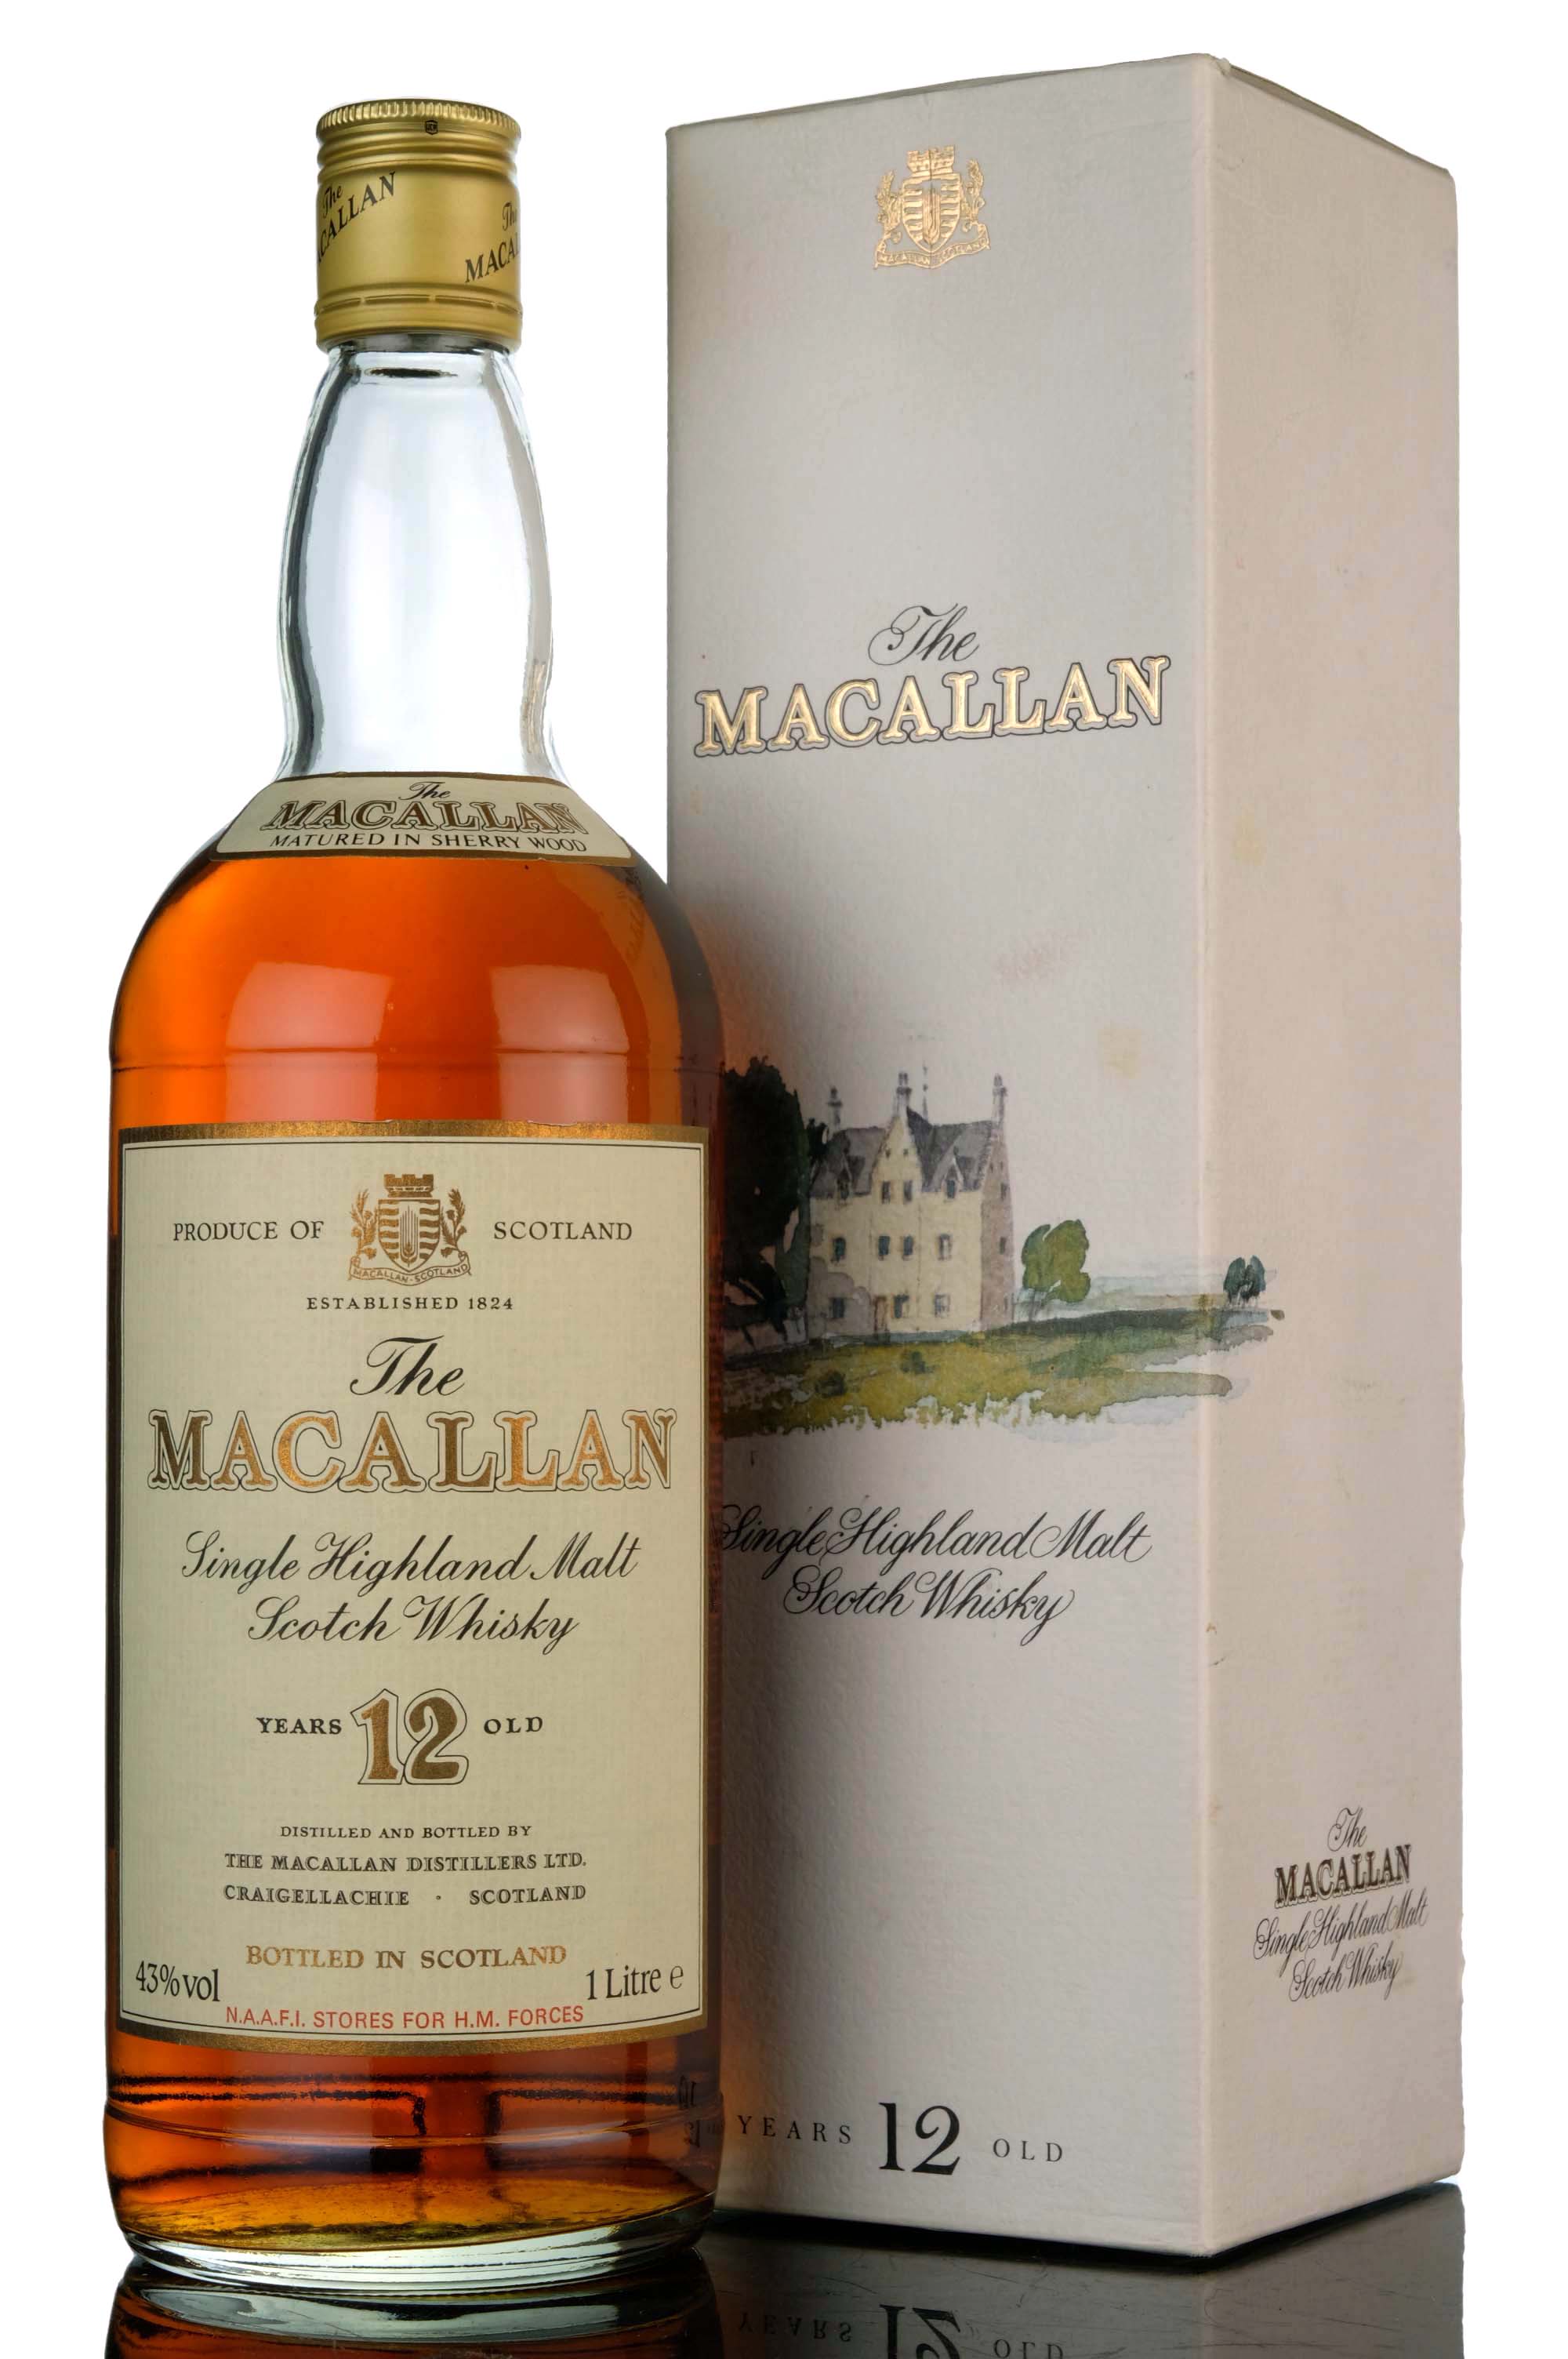 Macallan 12 Year Old - Sherry Cask - 1980s - 1 Litre - N.A.A.F.I Stores